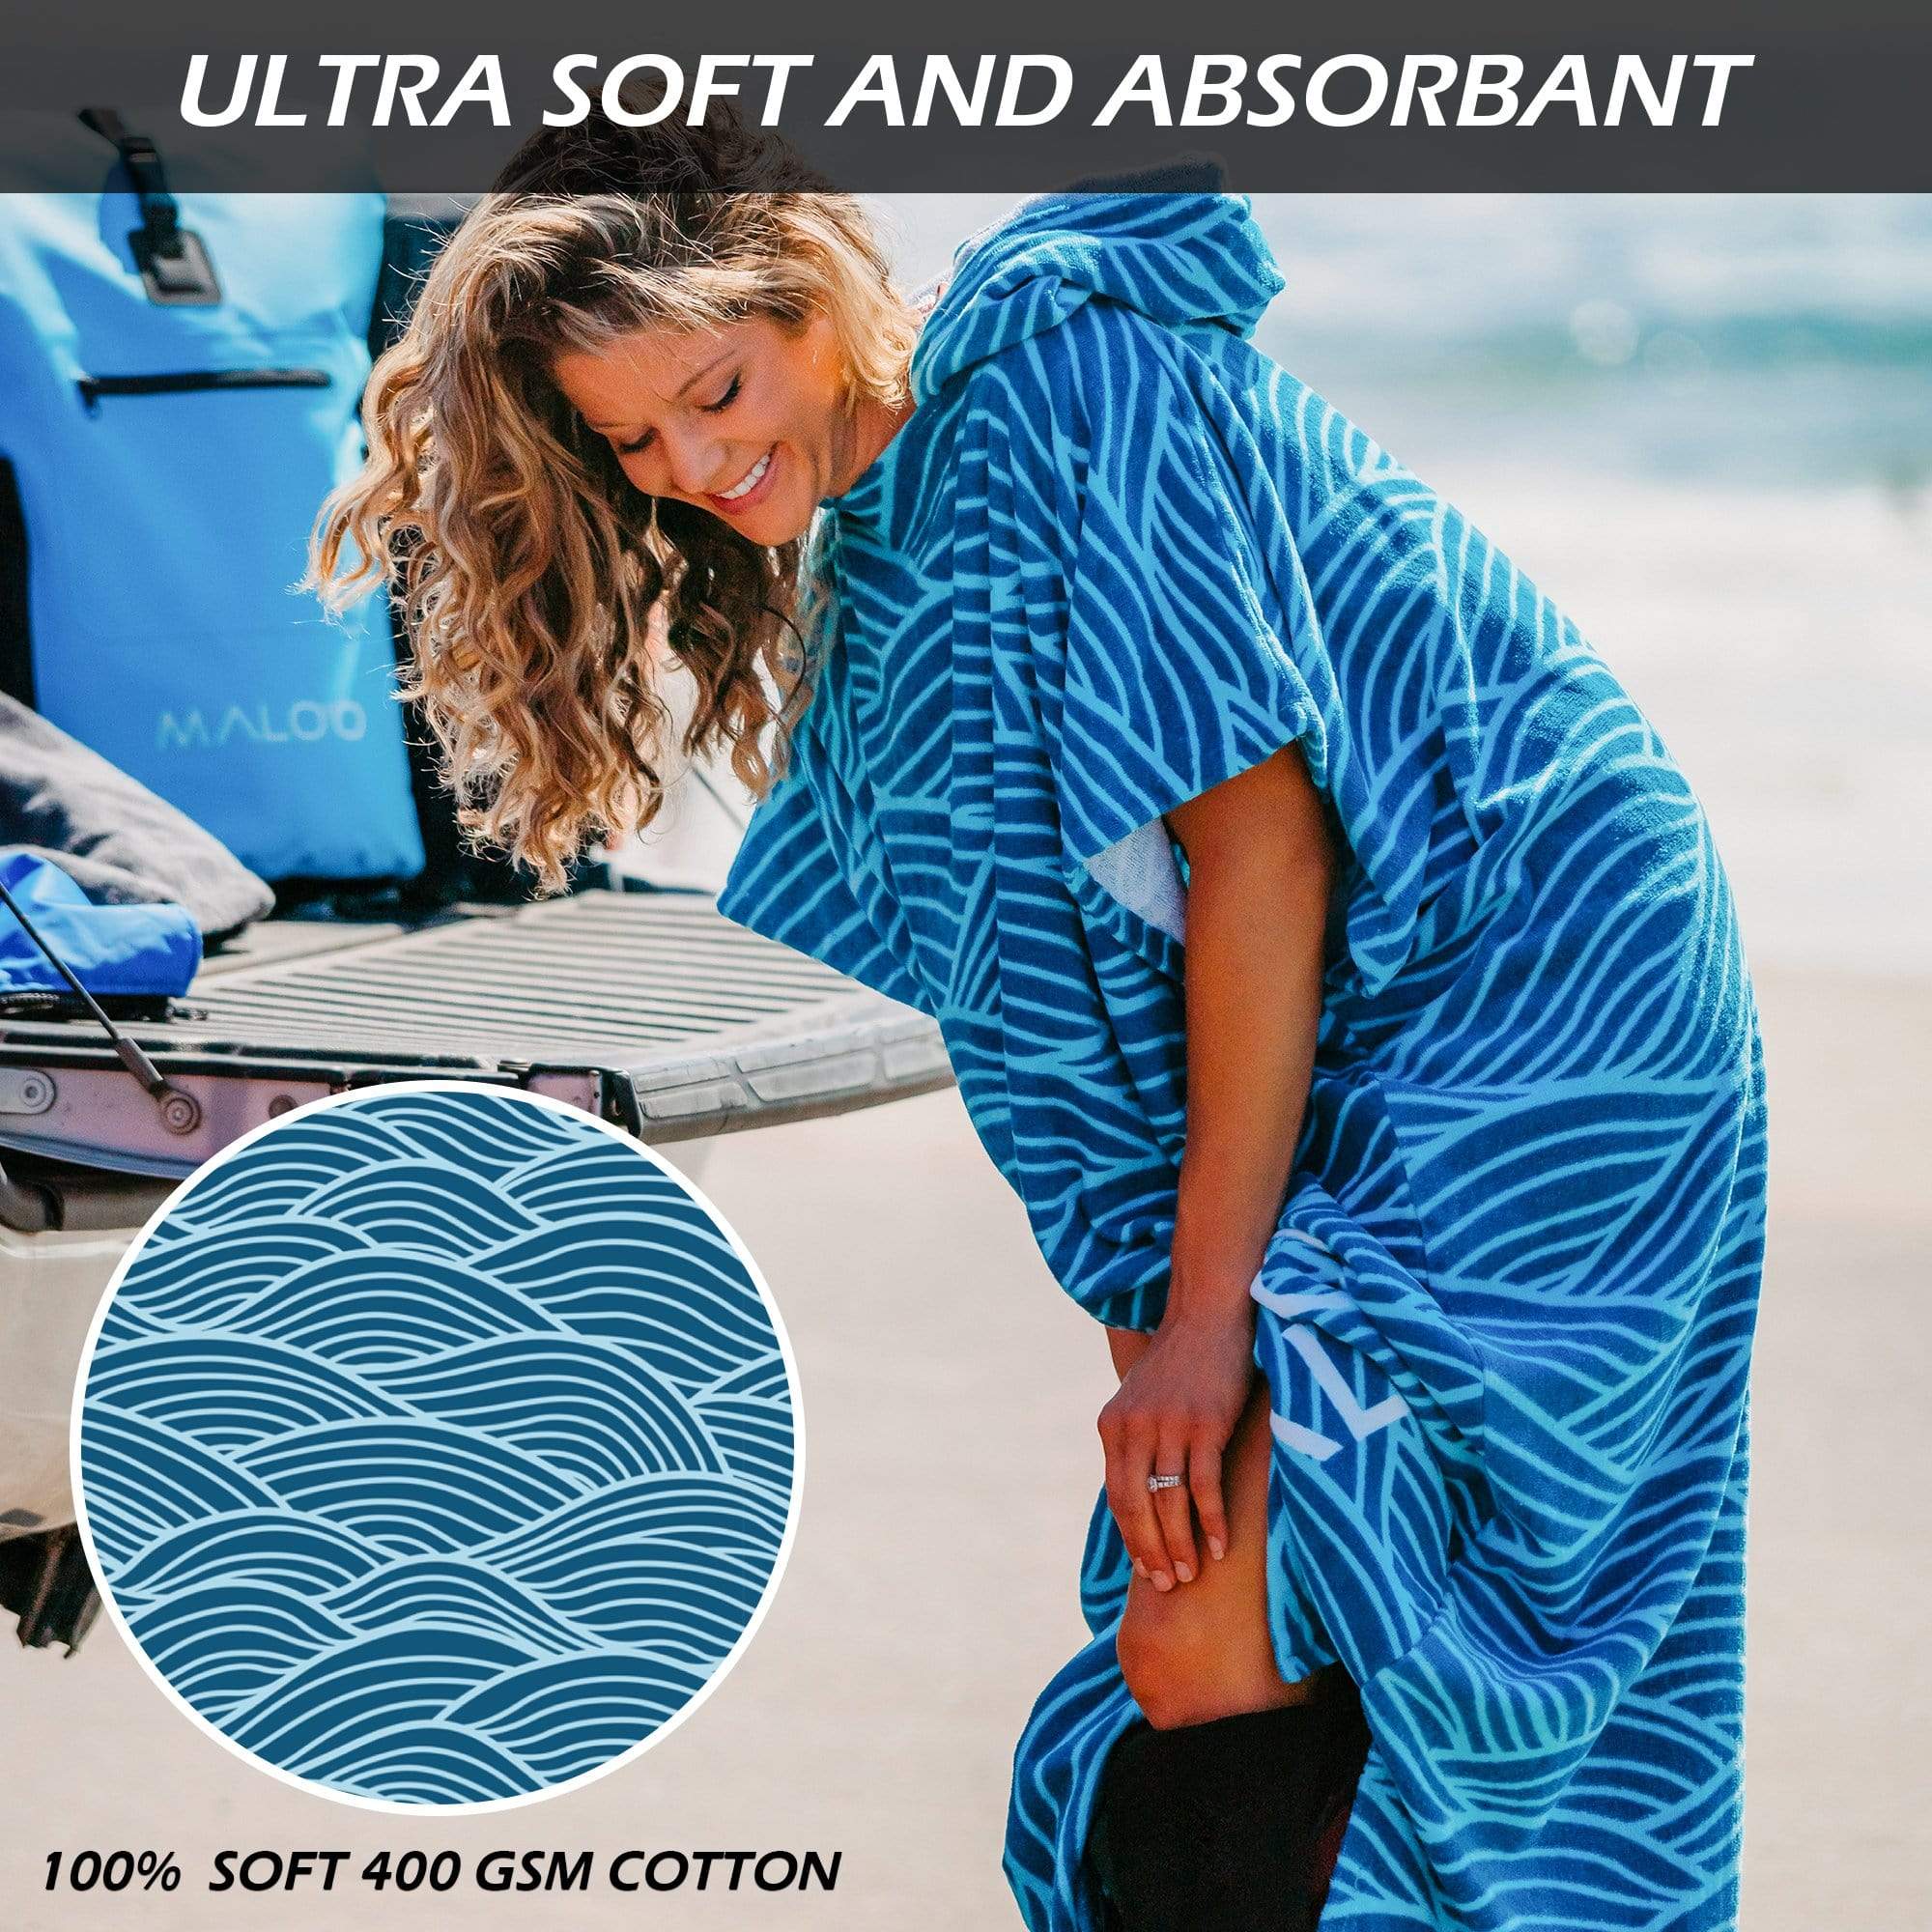 Surf Poncho - Don't get caught with your pants down! [FREE SHIPPING]